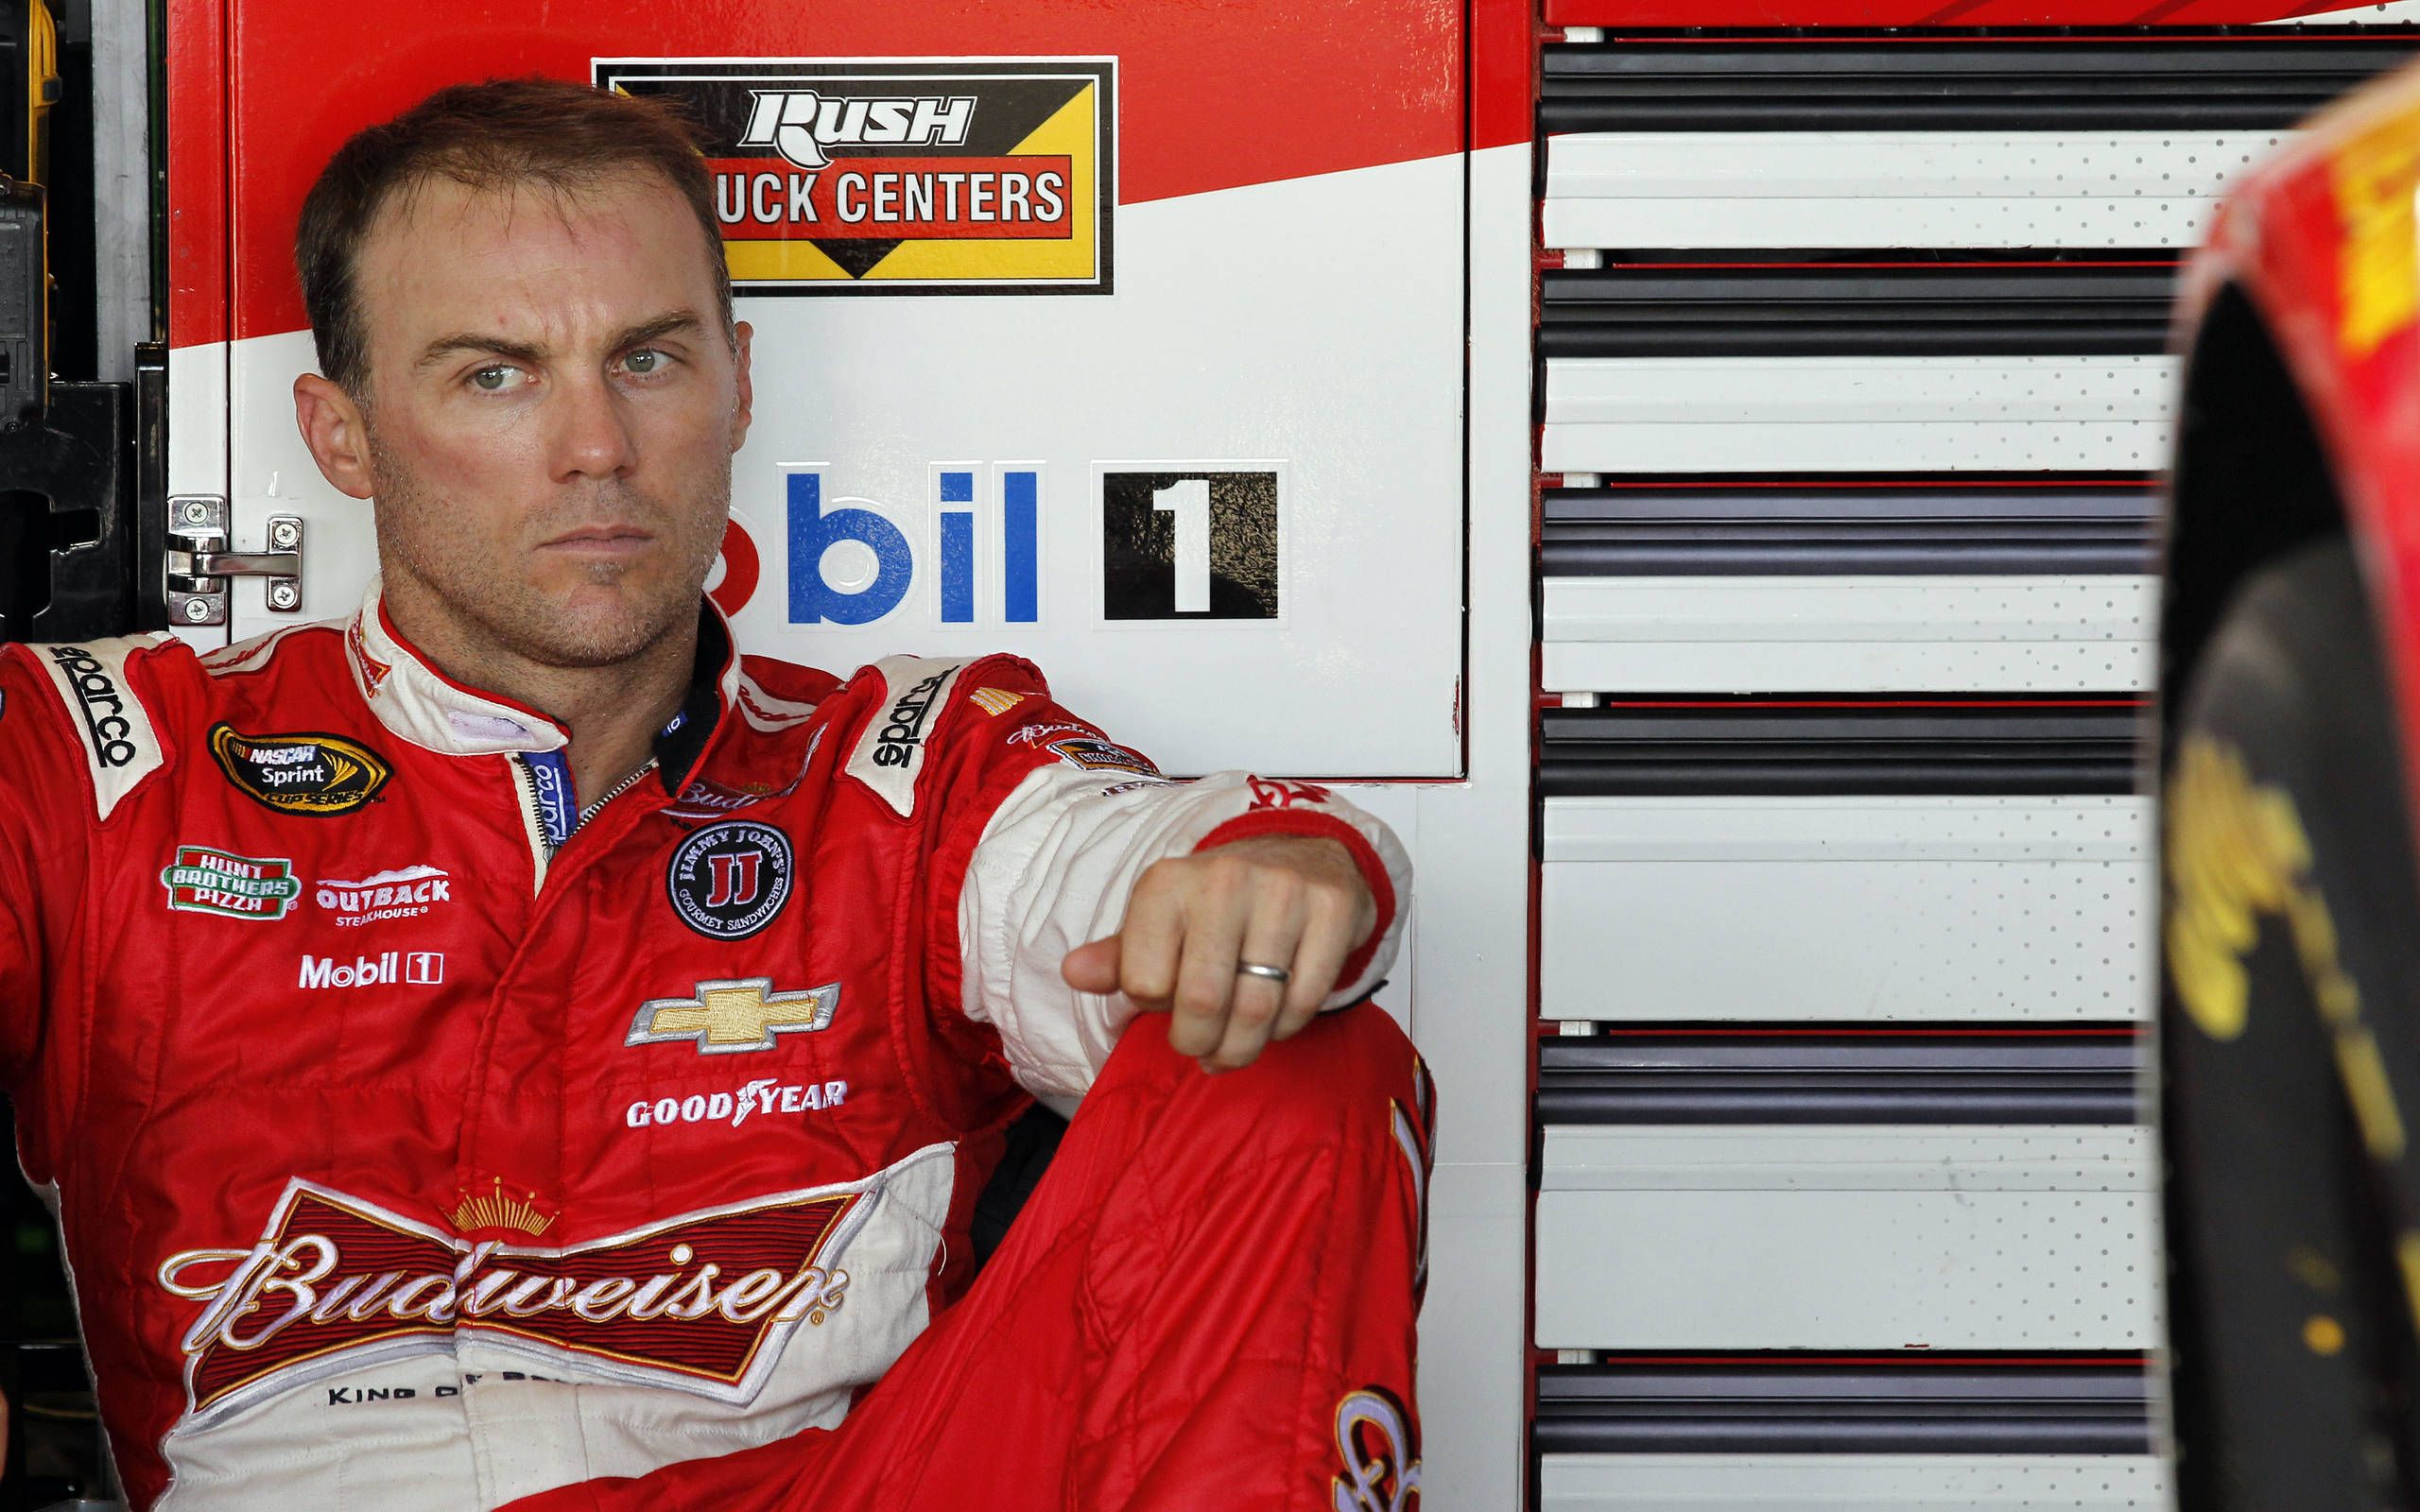 Chevy NASCAR driver Kevin Harvick favored to win Sprint Cup